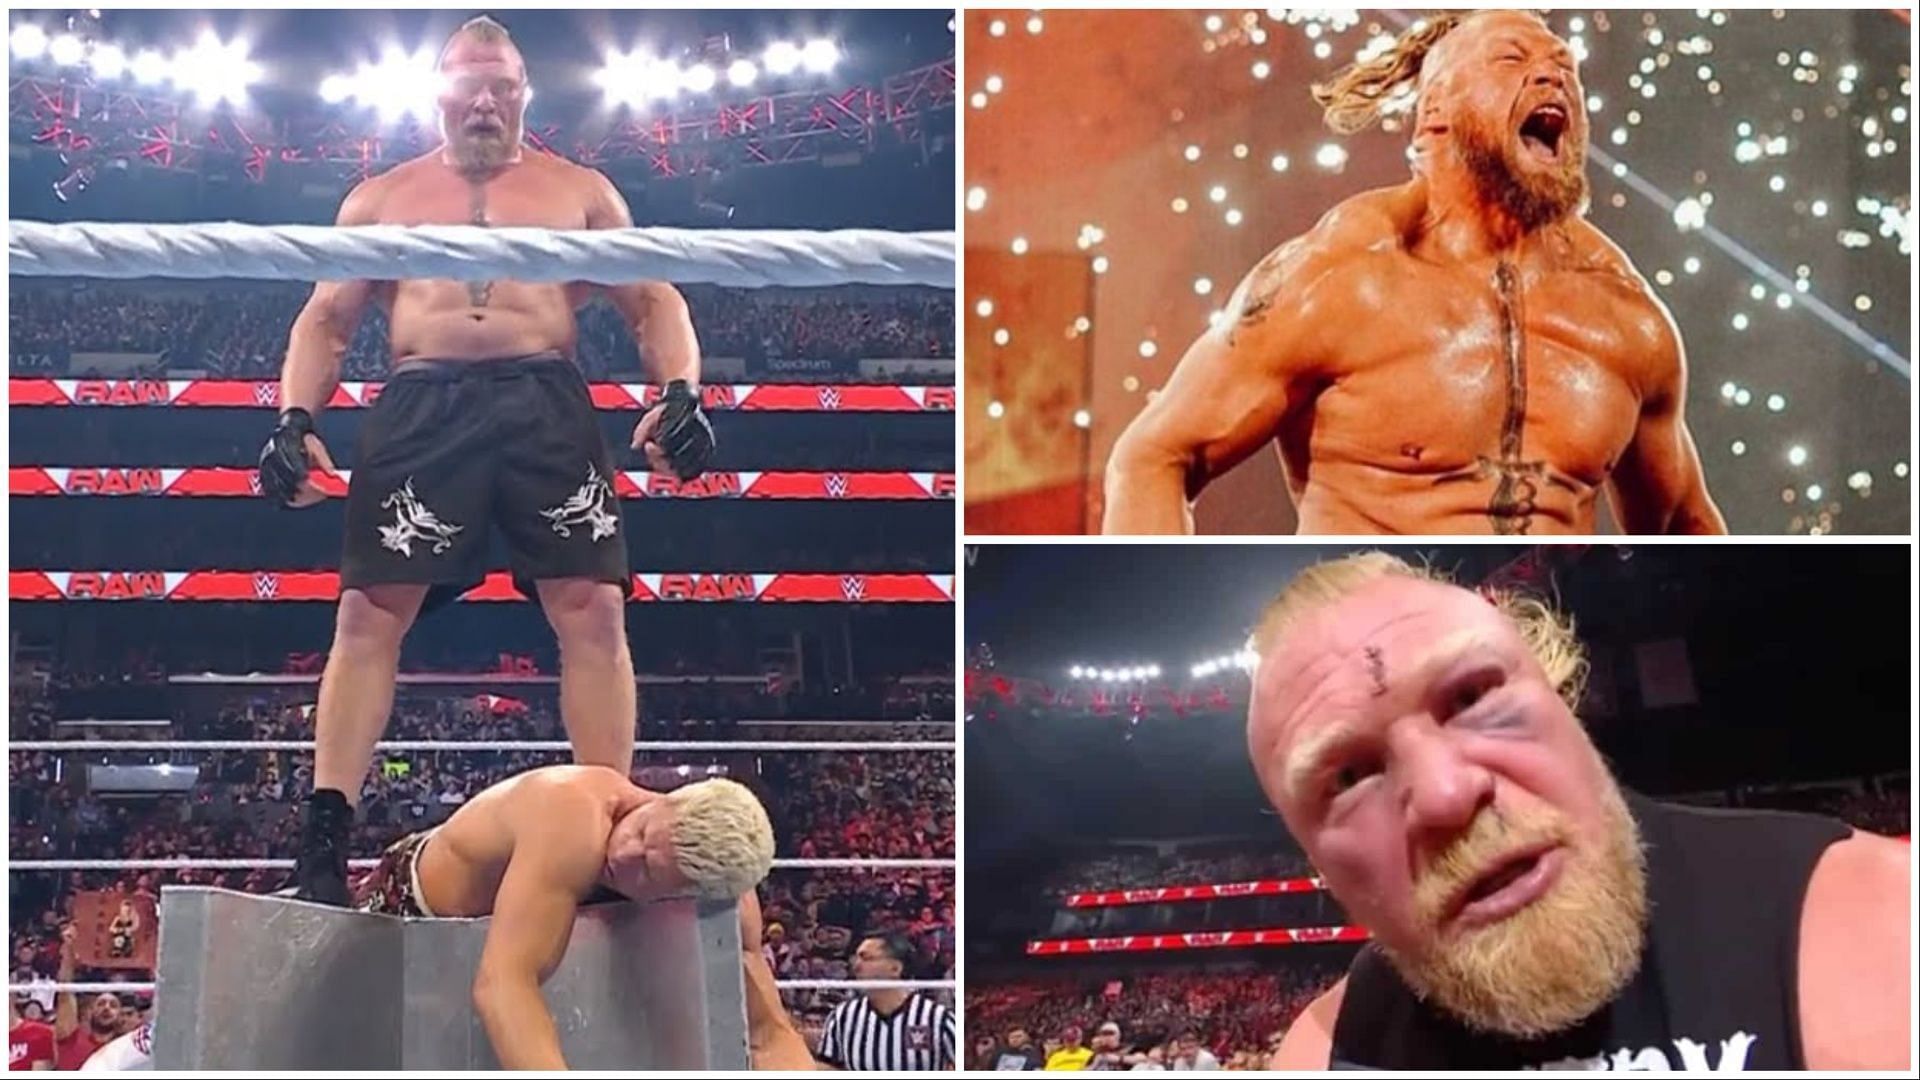 Brock Lesnar has been a mainstay in WWE for years. [Image credits: WWE